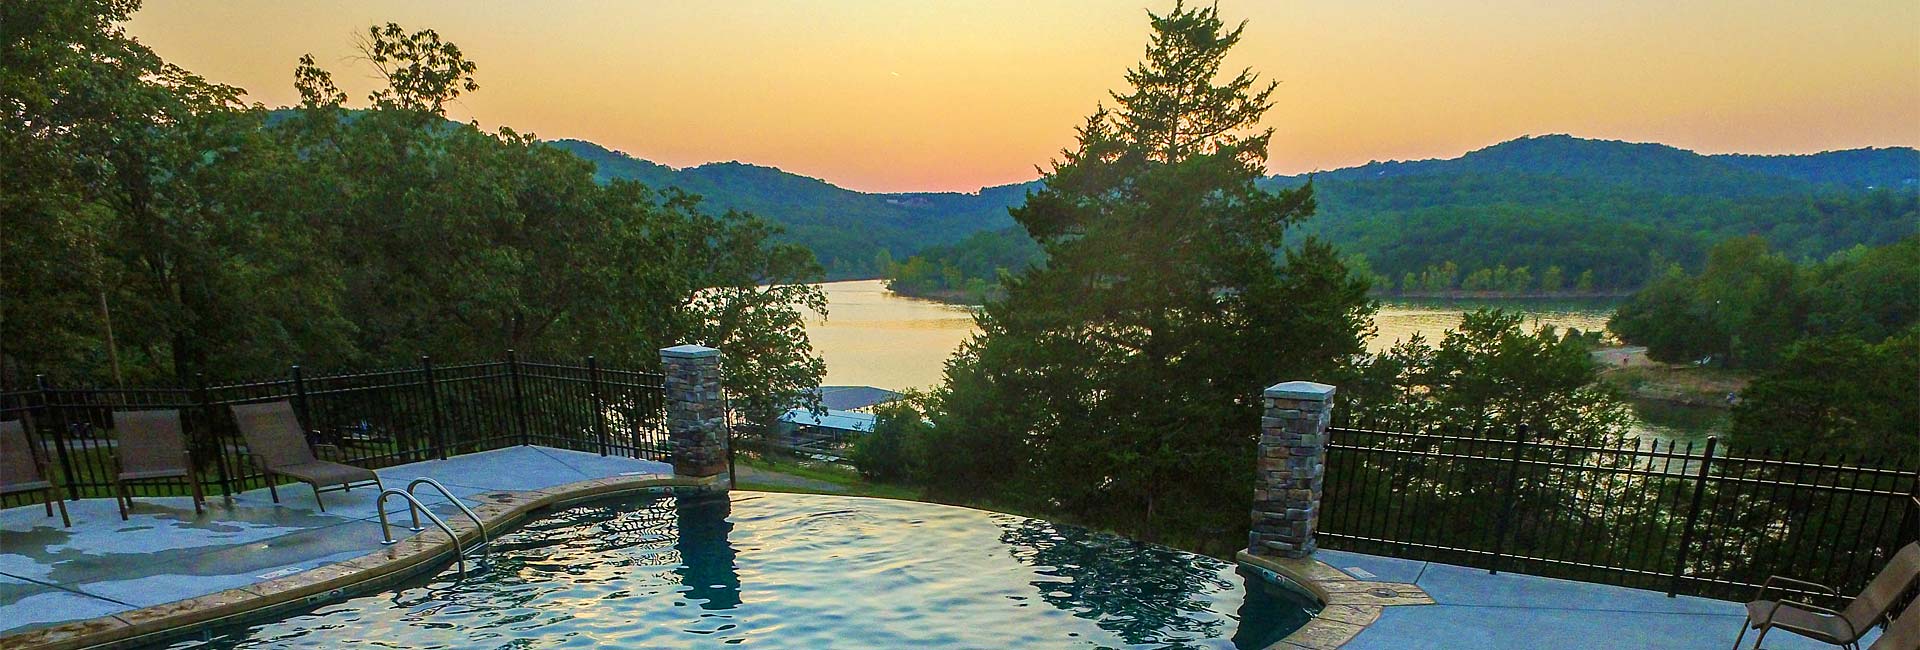 Lakeview from the infinity pool at Alpine Lodge Resort, Branson, MO.